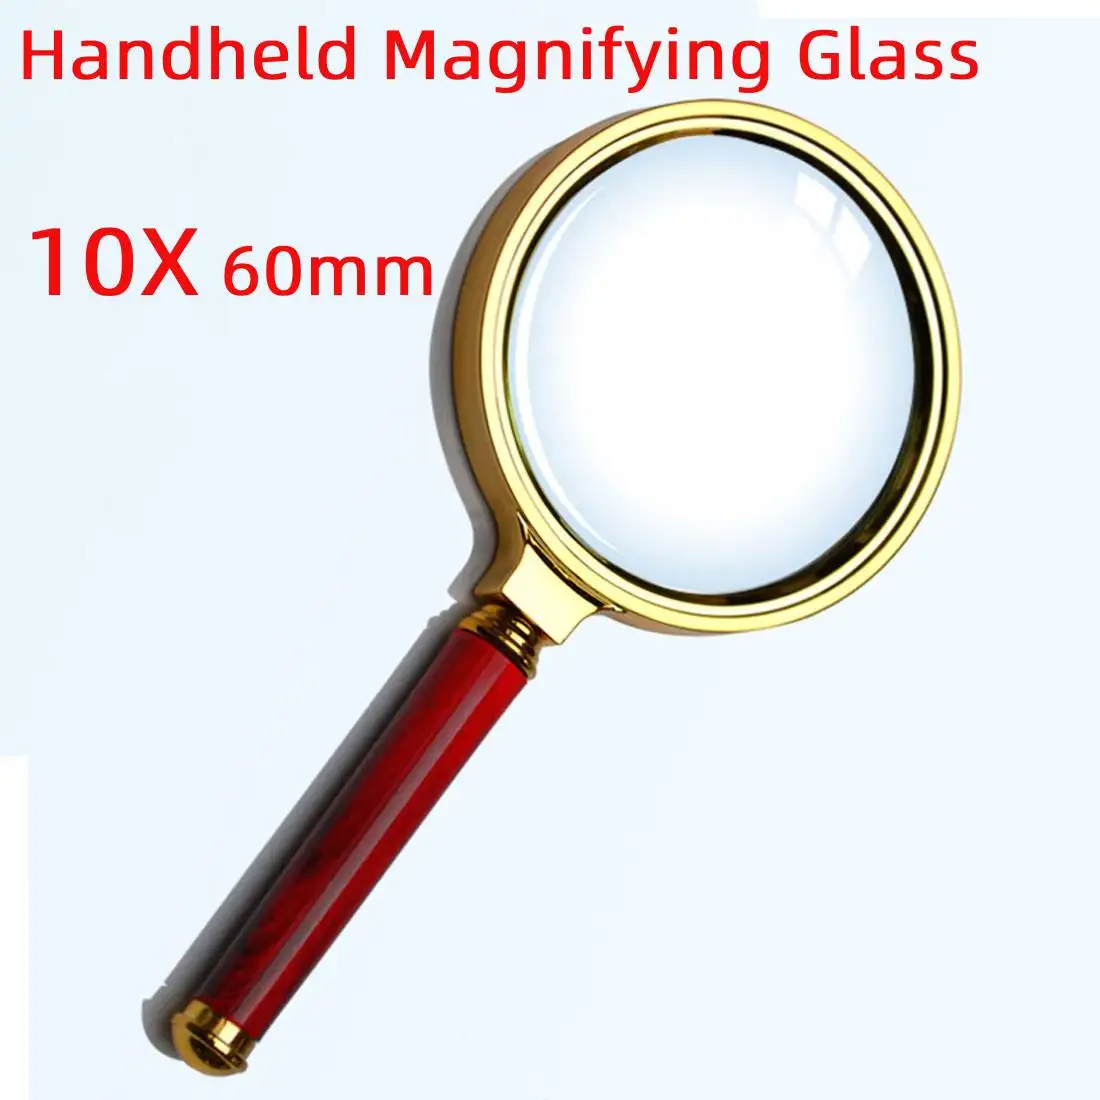 

Magnifying Glass Portable Handheld Magnifier for Jewelry Newspaper Book Reading High Definition Eye Loupe Glass 10X 60mm